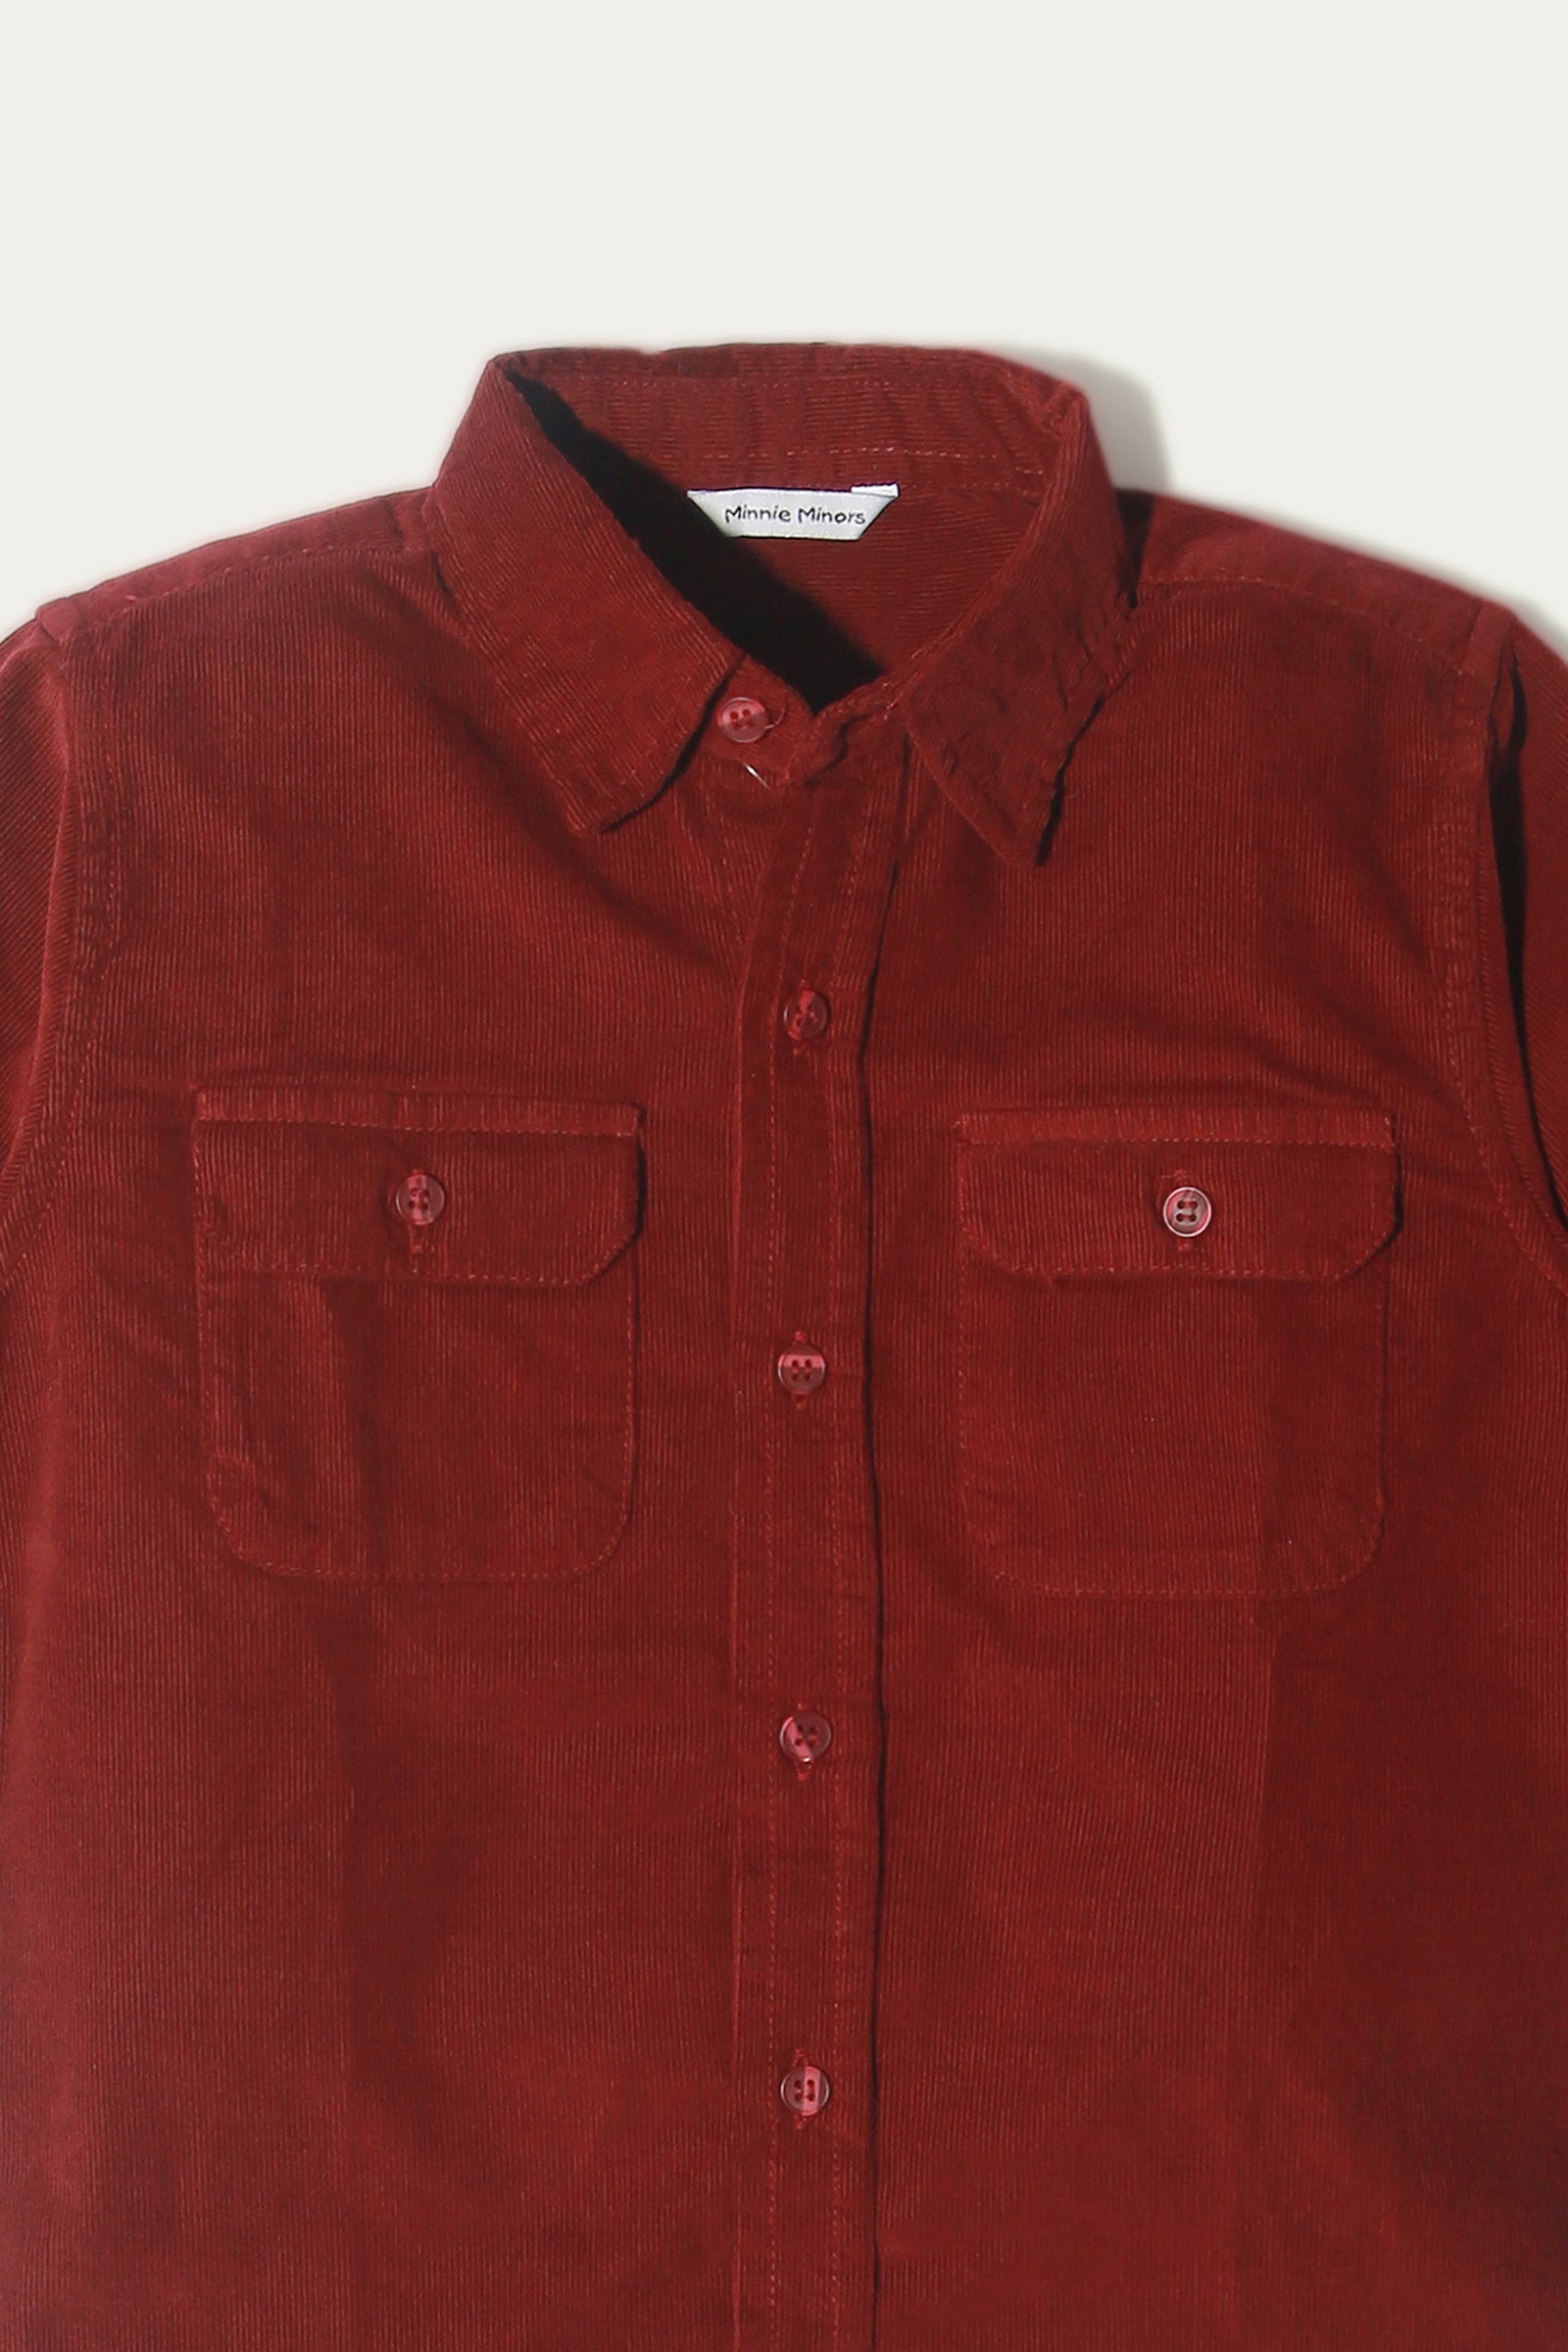 SHIRT WITH FLAP POCKET (MSWBS-013)